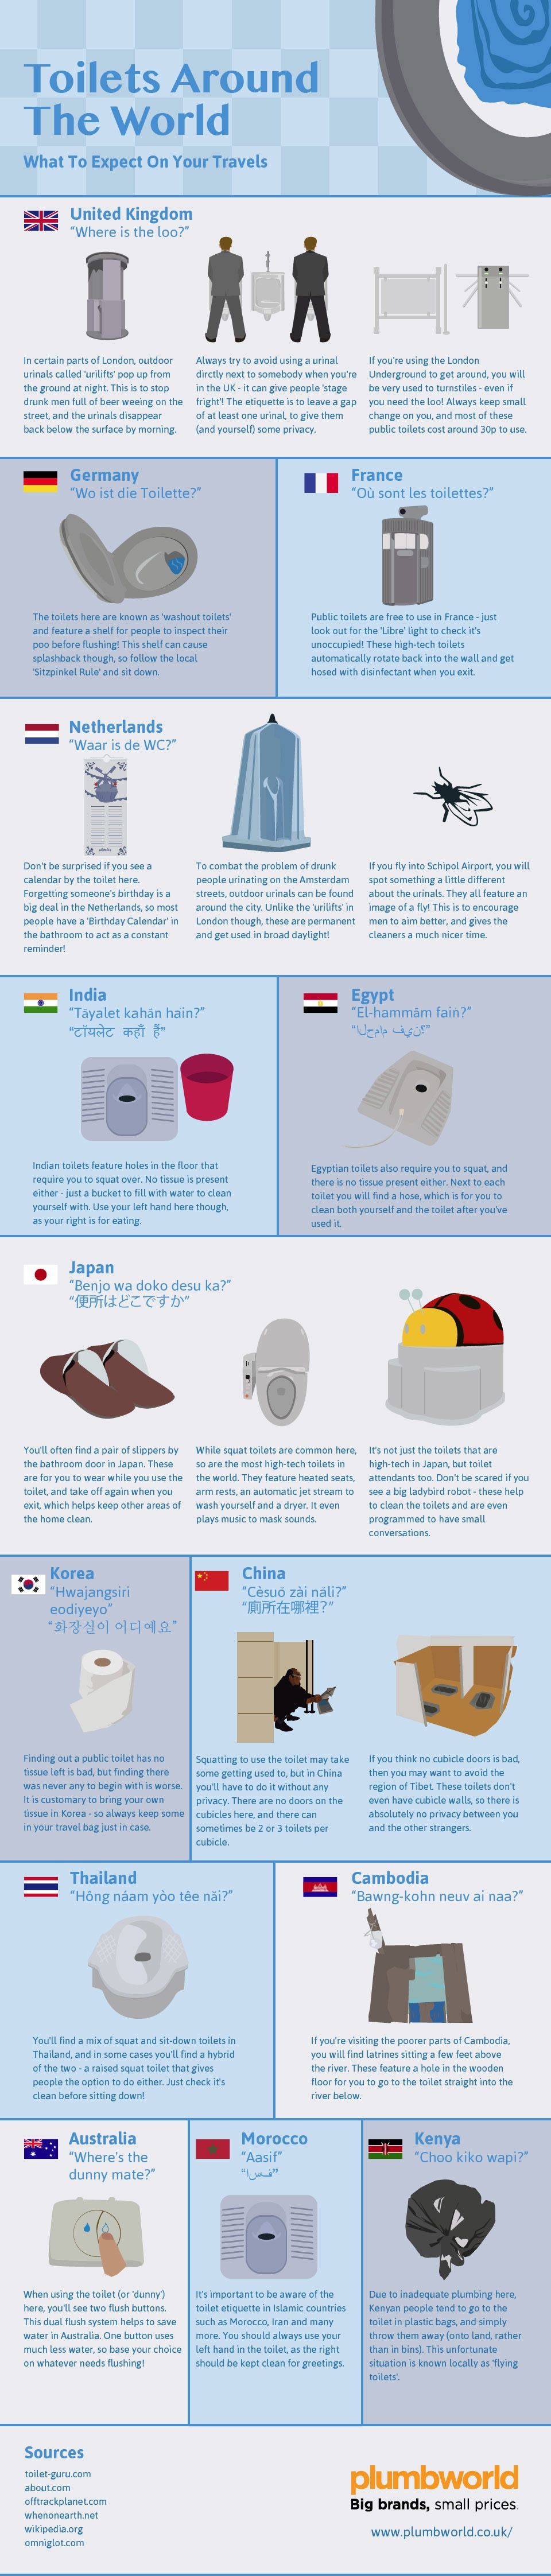 A Brief Look at Toilets Around the World